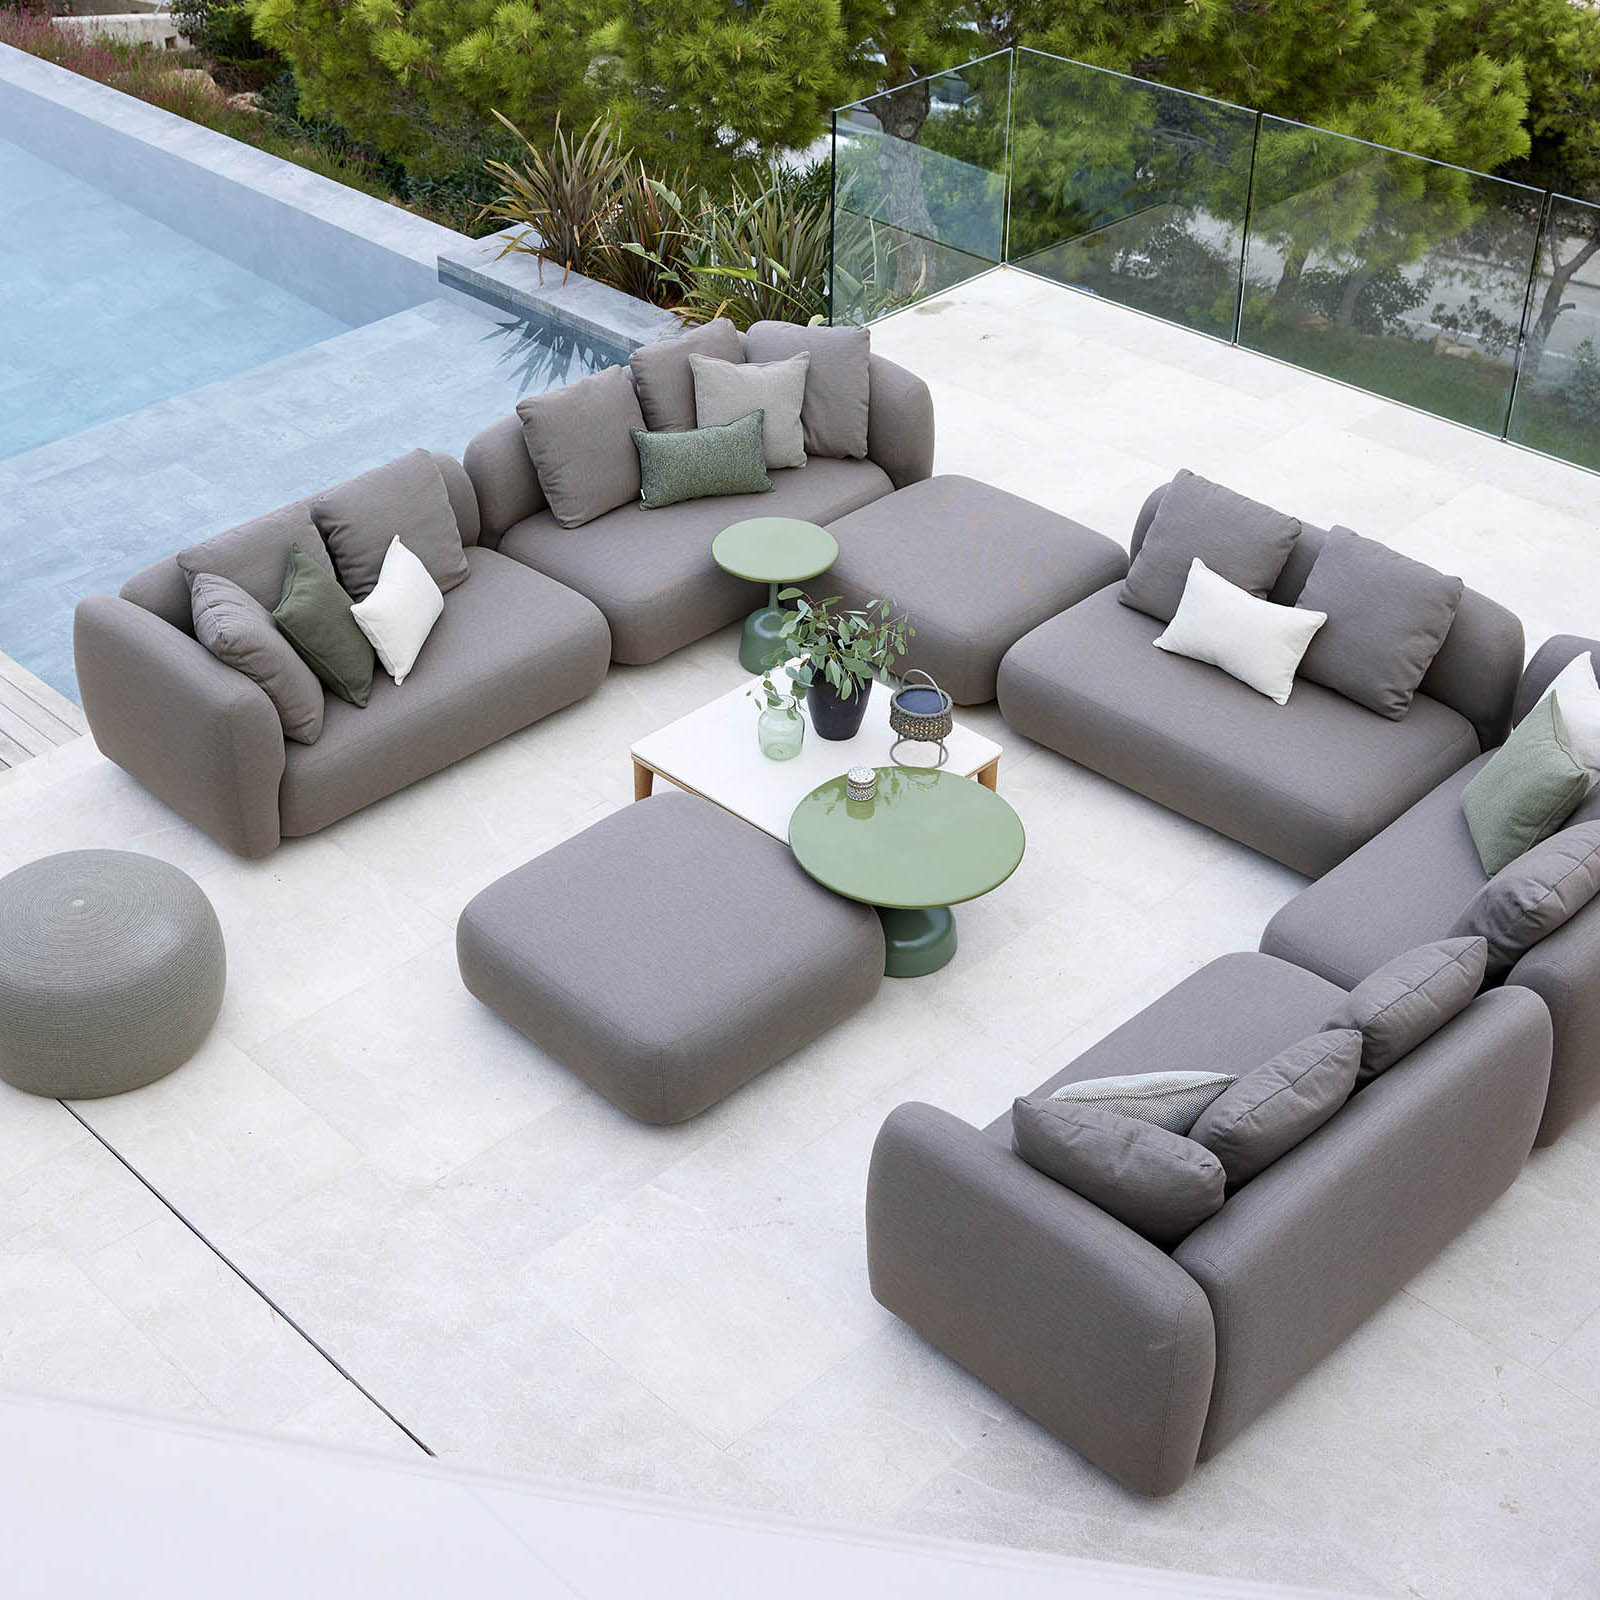 Capture Ecksofa 1 aus Cane-line AirTouch in Taupe